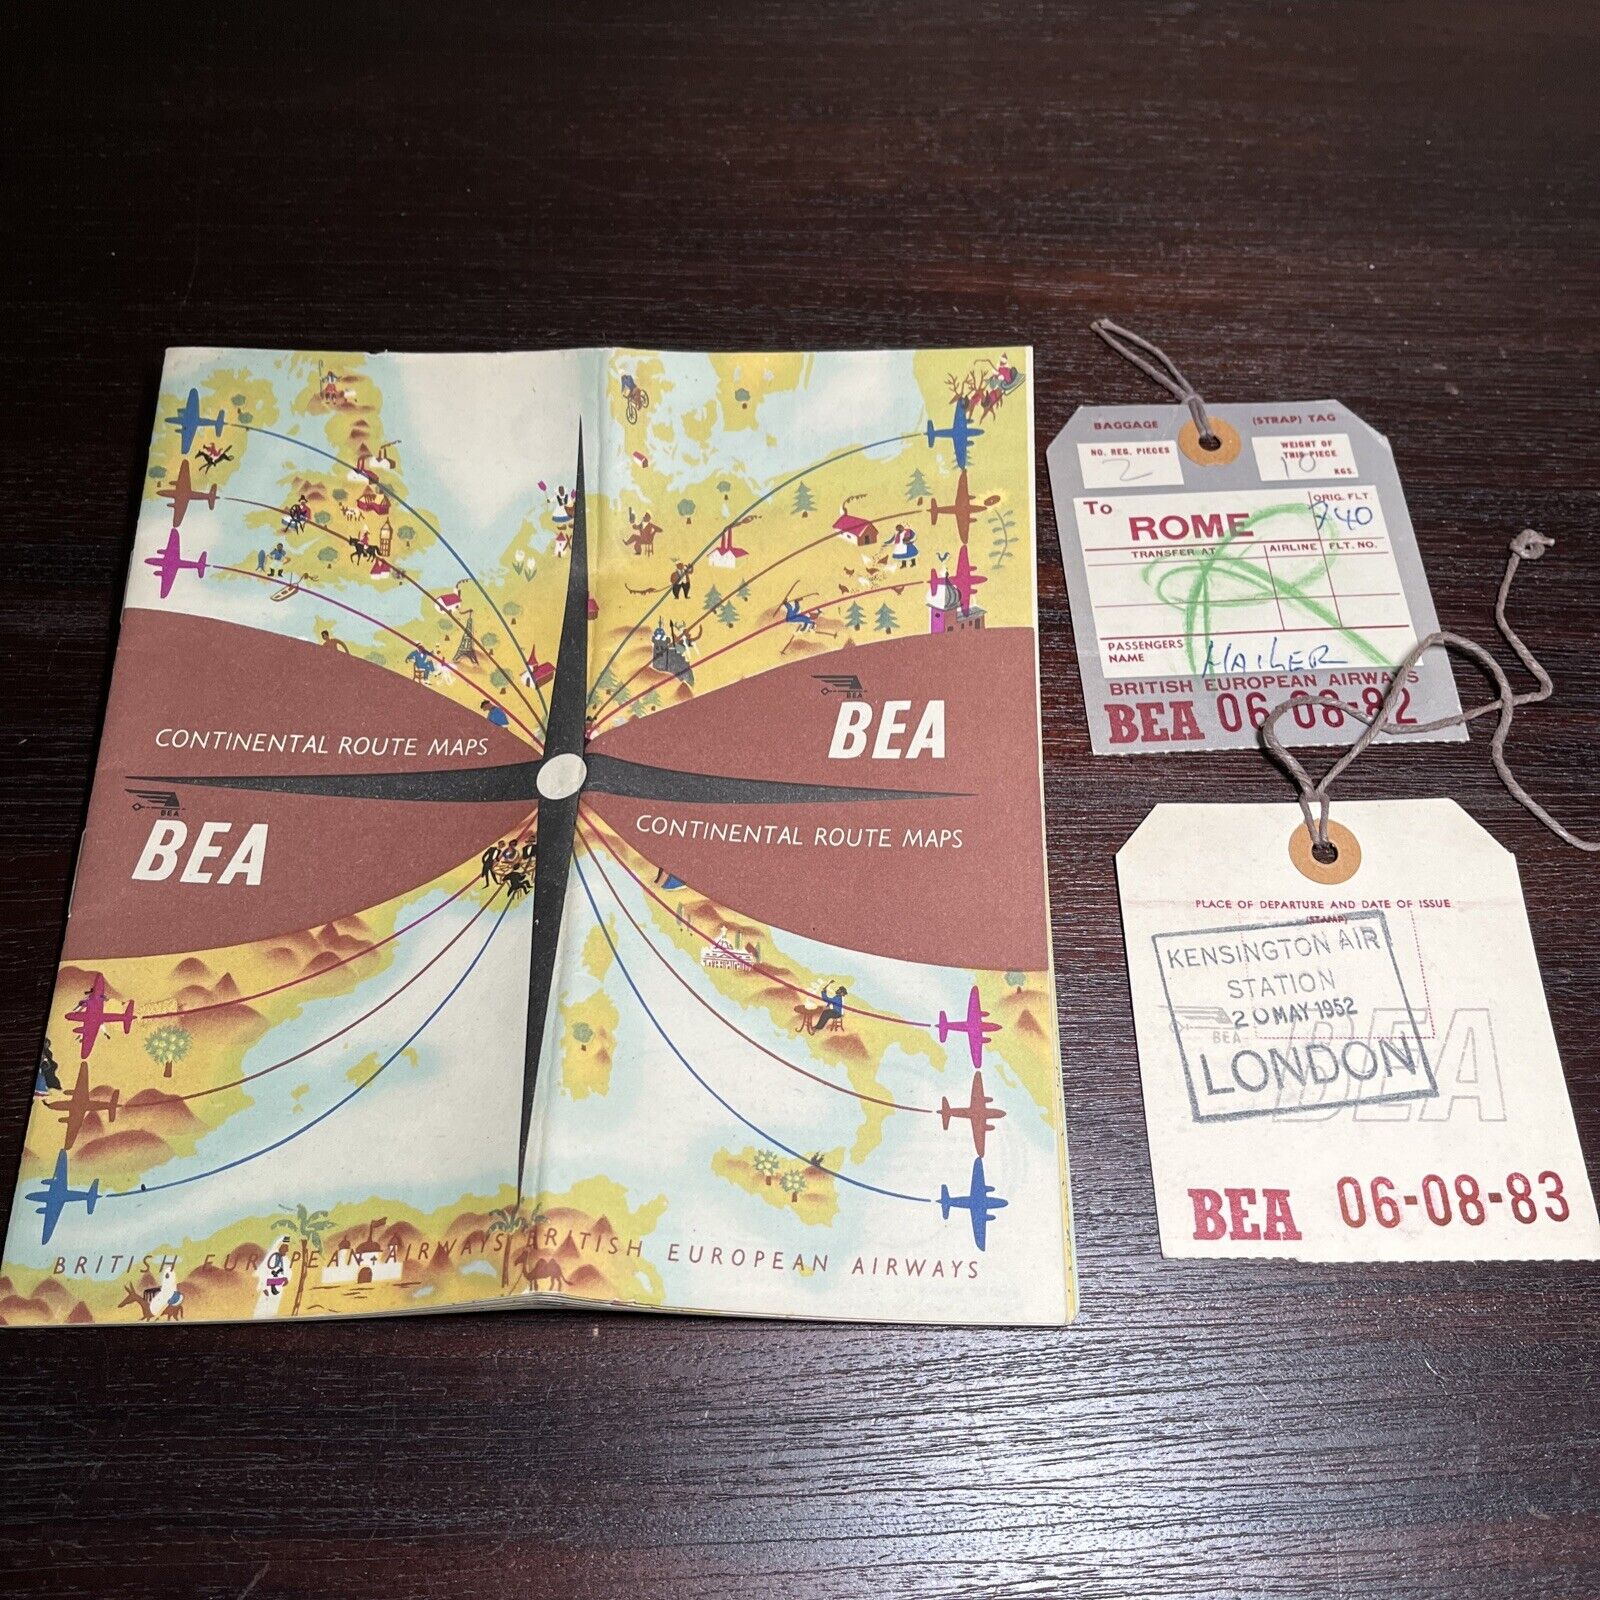 BEA CONTINENTAL ROUTE MAPS 1952 BRITISH EUROPEAN AIRWAYS, Luggage Tags- Rome